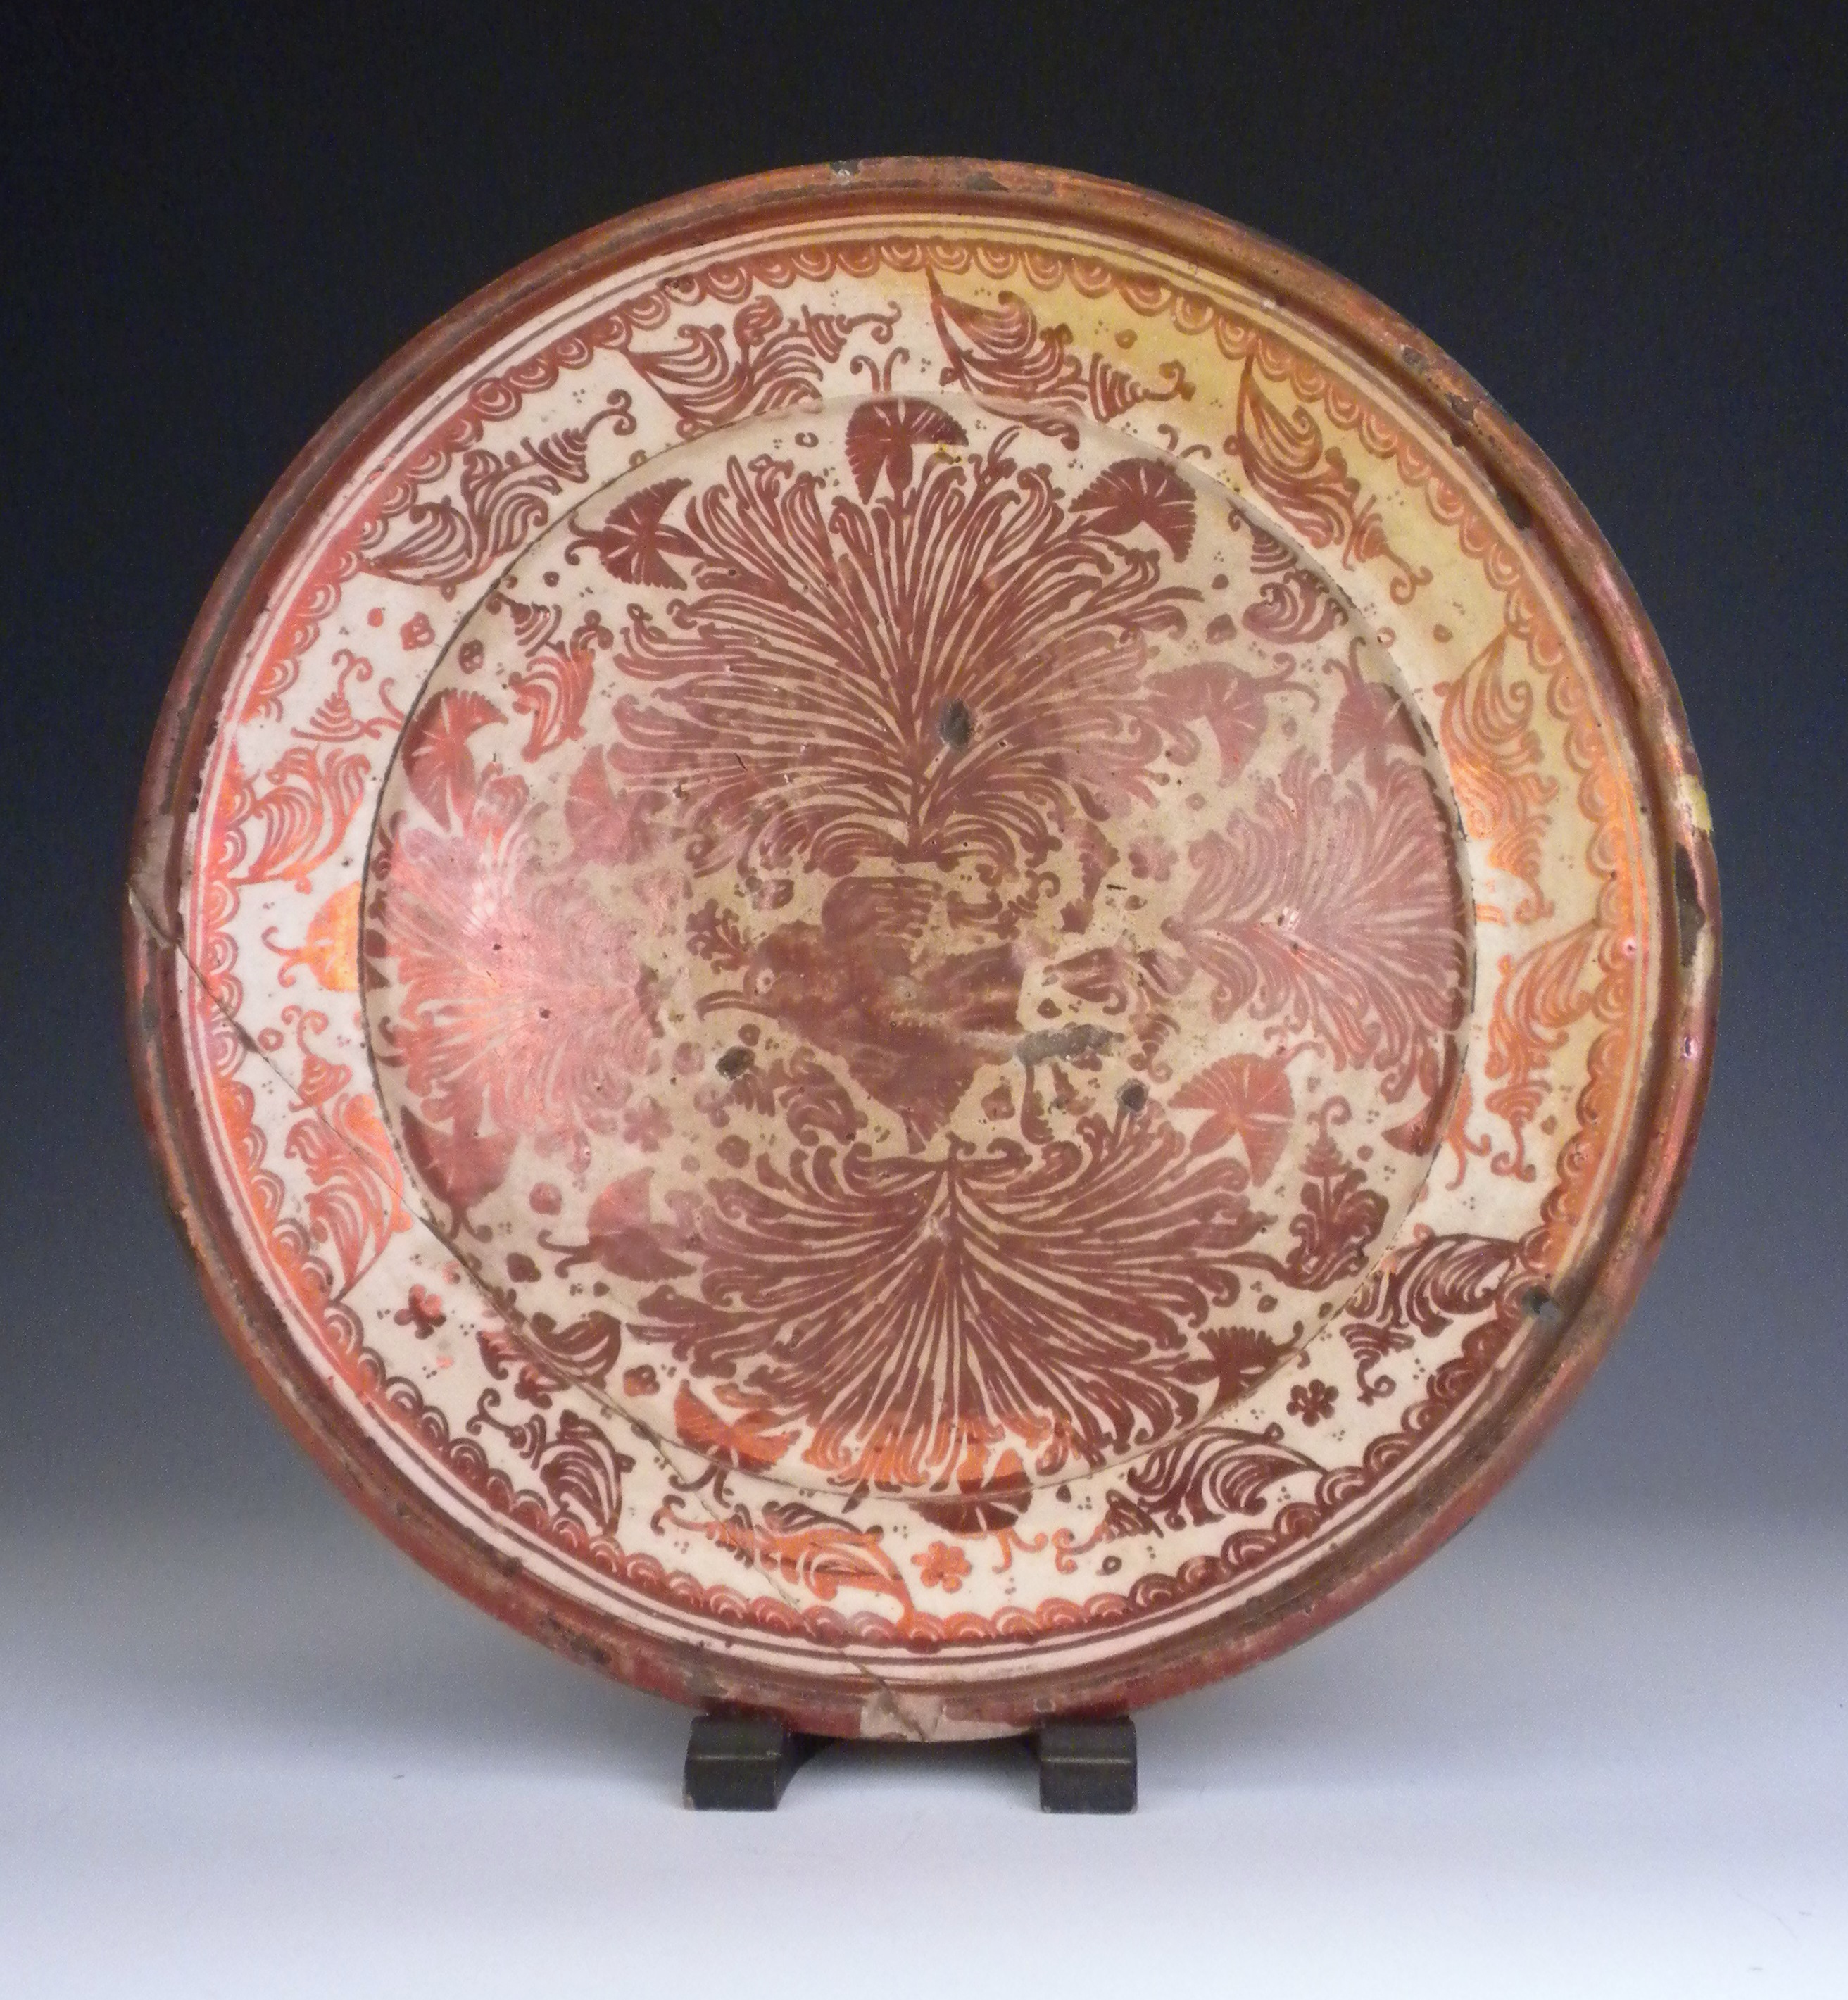 A 17th century Hispano-Moresque lustre Bowl, probably Manises (Valencia), painted in ruby lustre